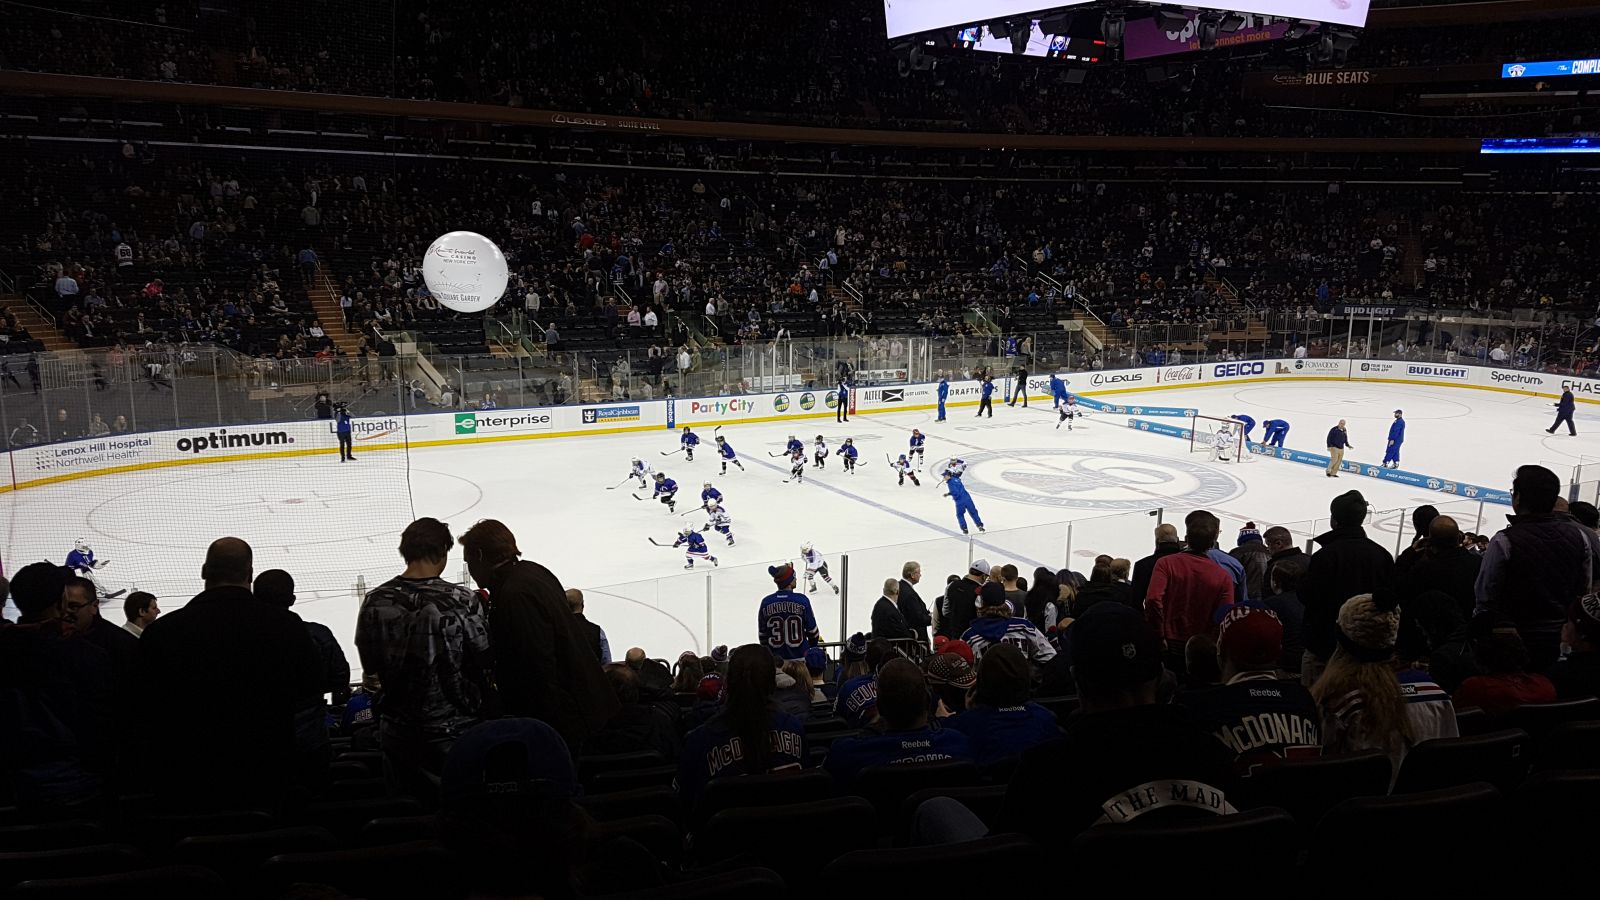 section 105, row 12 seat view  for hockey - madison square garden